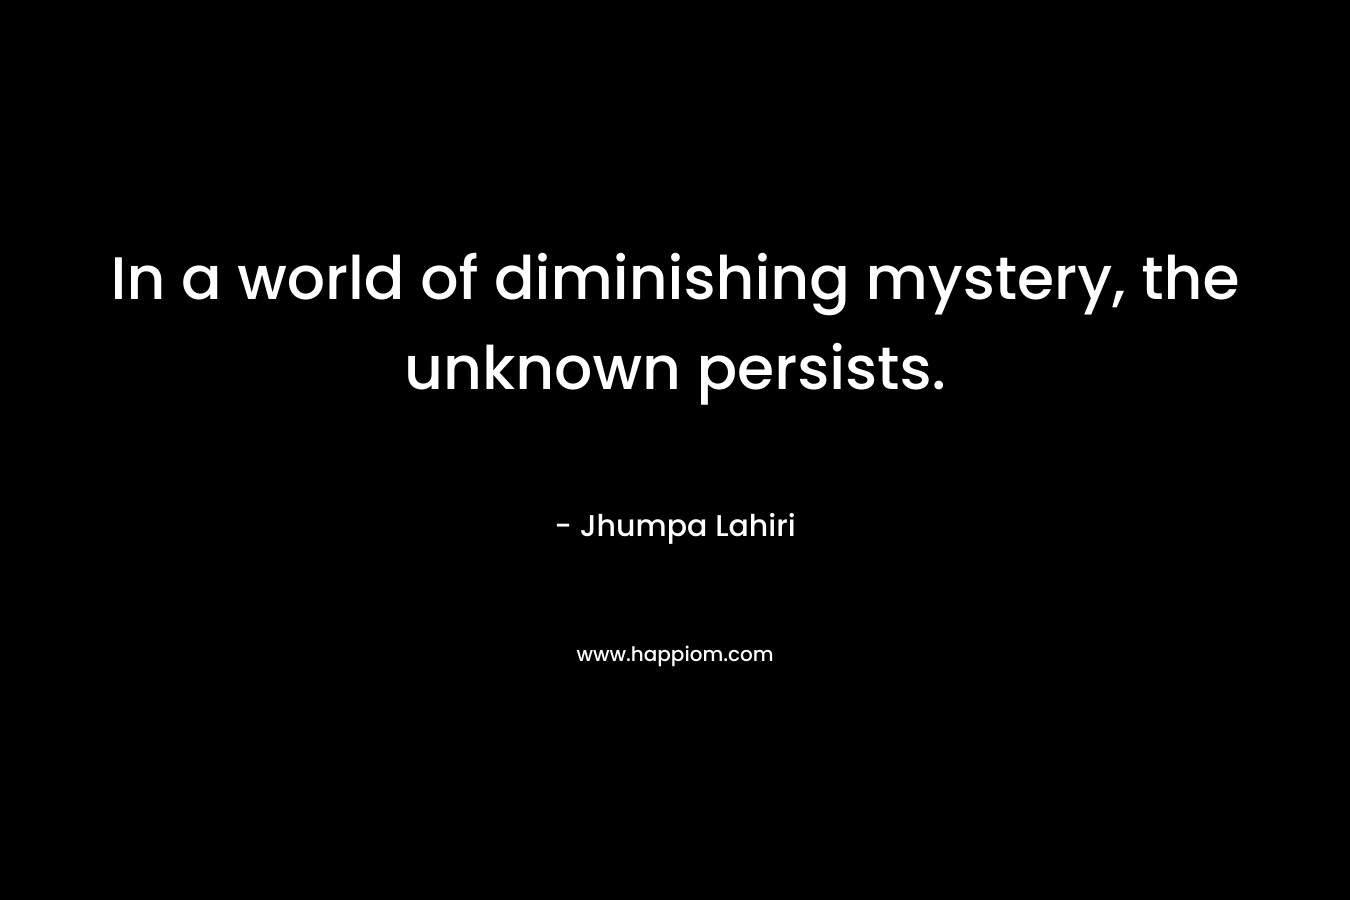 In a world of diminishing mystery, the unknown persists. – Jhumpa Lahiri